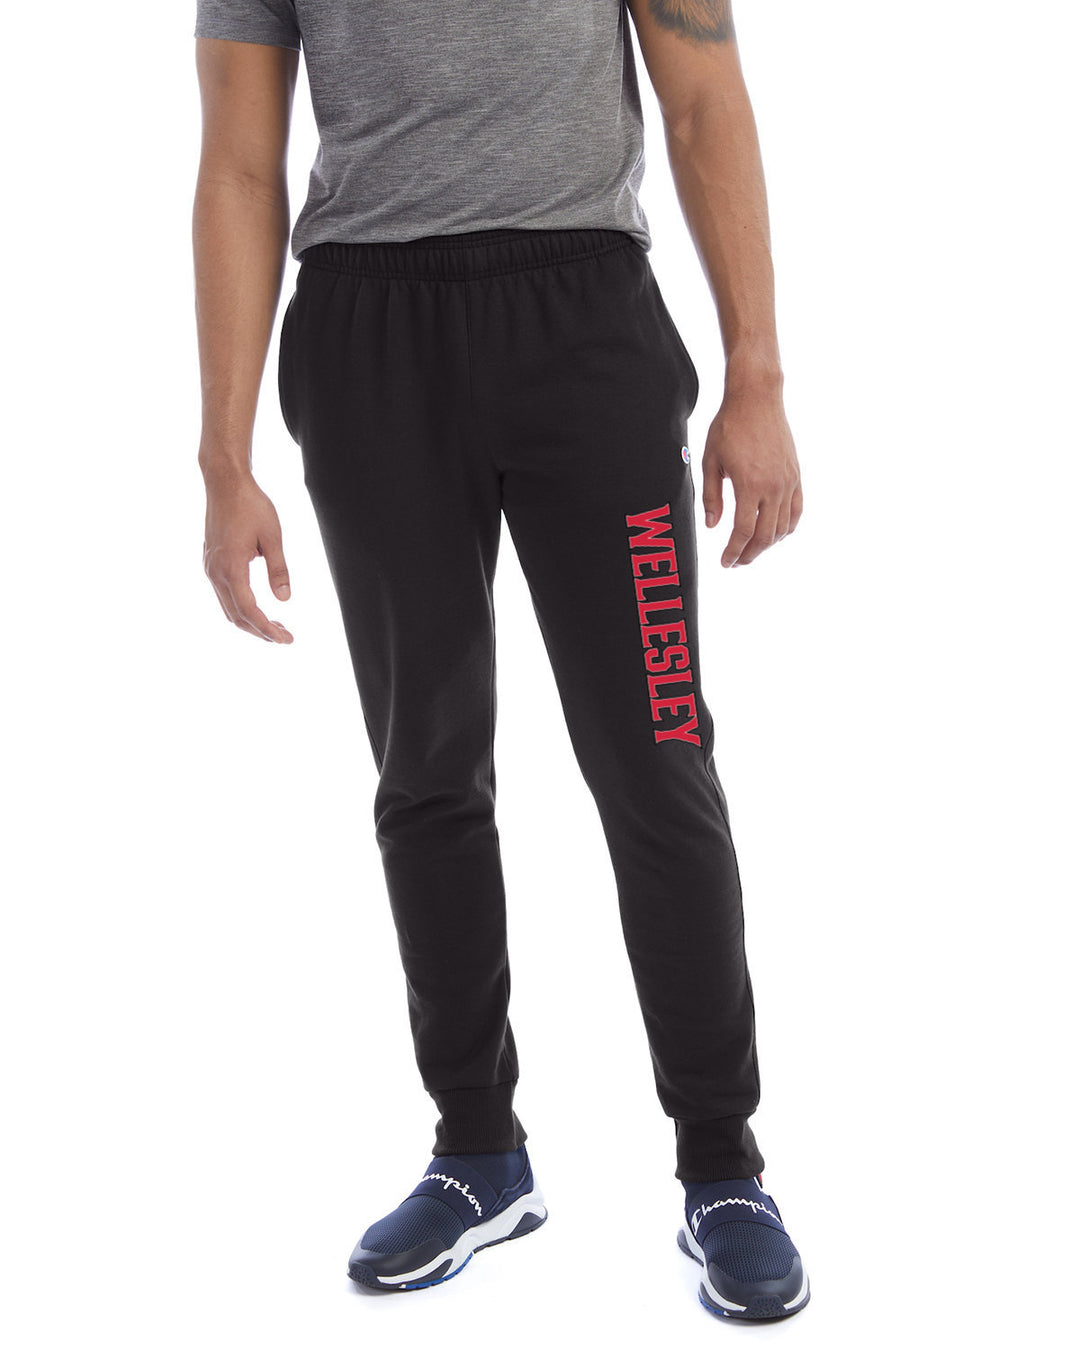 Wellesley Track and Field 2023 - Champion Unisex PowerBlend Fleece Jogger - P930